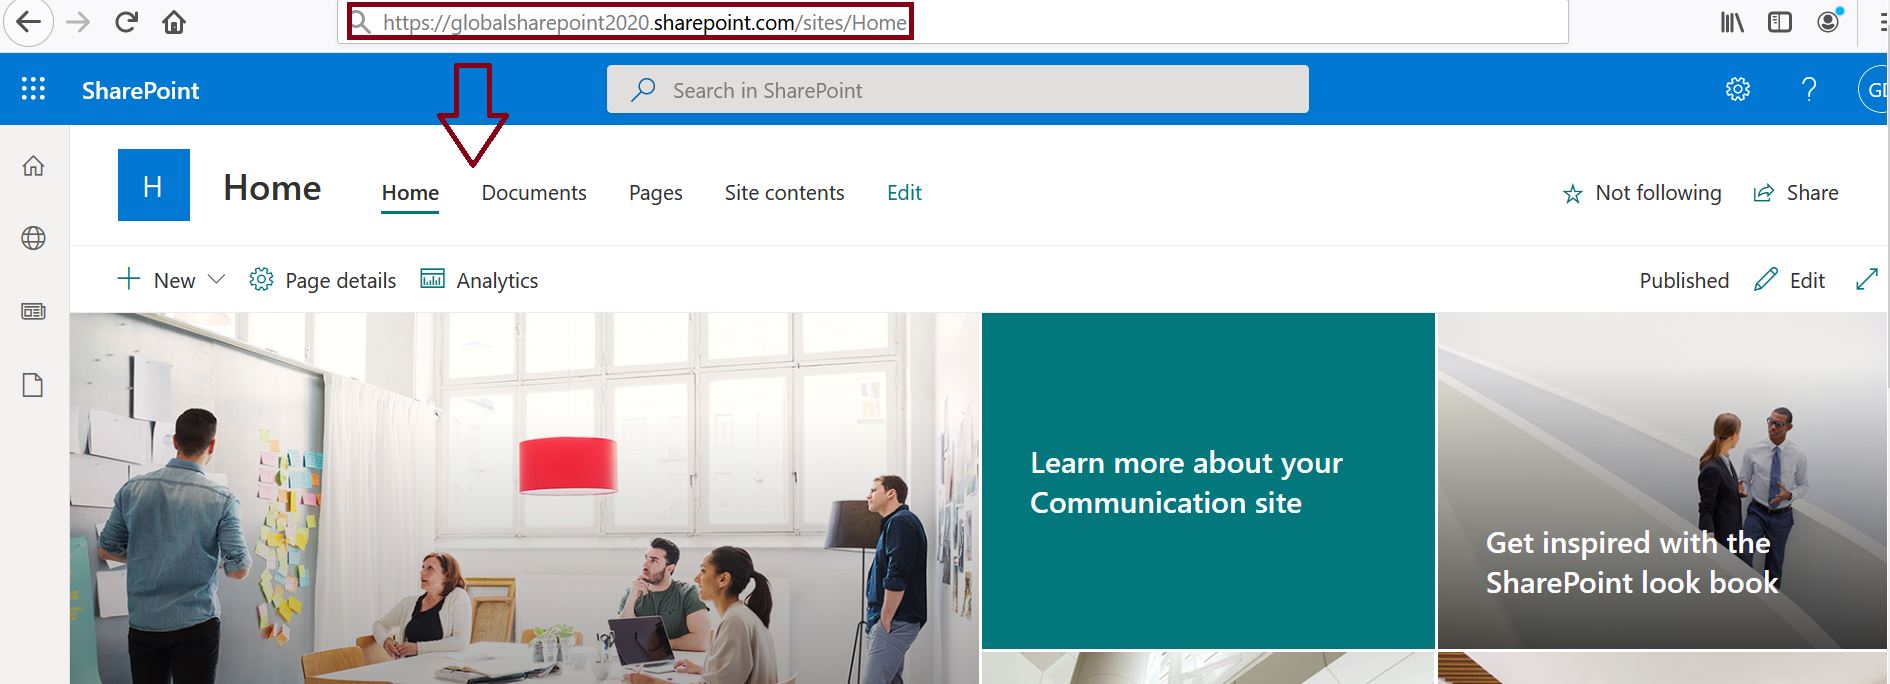 SharePoint Online home site before swapping